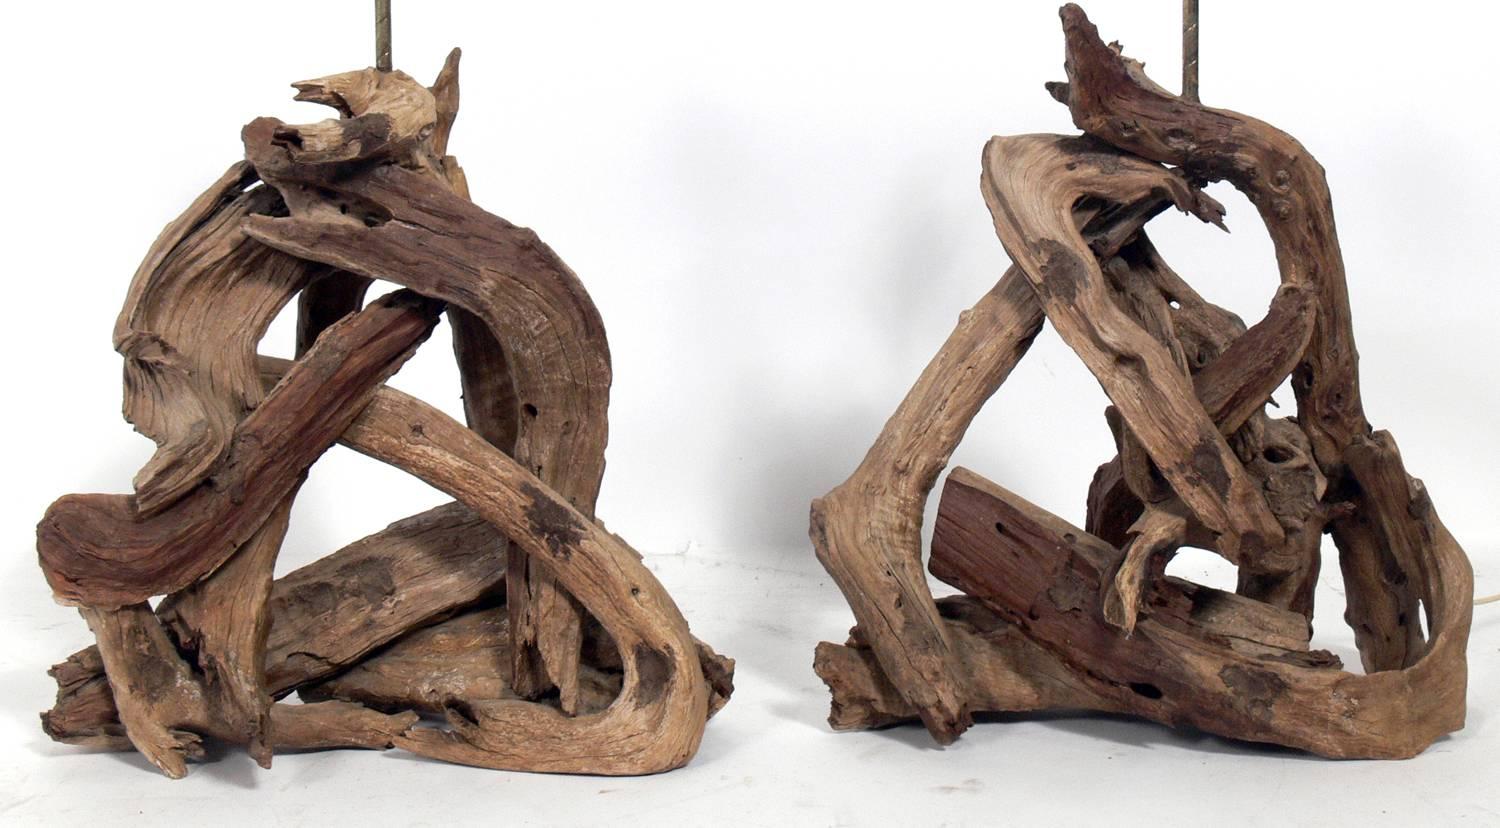 Pair of sculptural driftwood lamps, American, circa 1950s. They would be perfect in a beach house, or an interior with a nautical theme, or anywhere you need some organic sculptural forms. They retain their original driftwood finials. The price